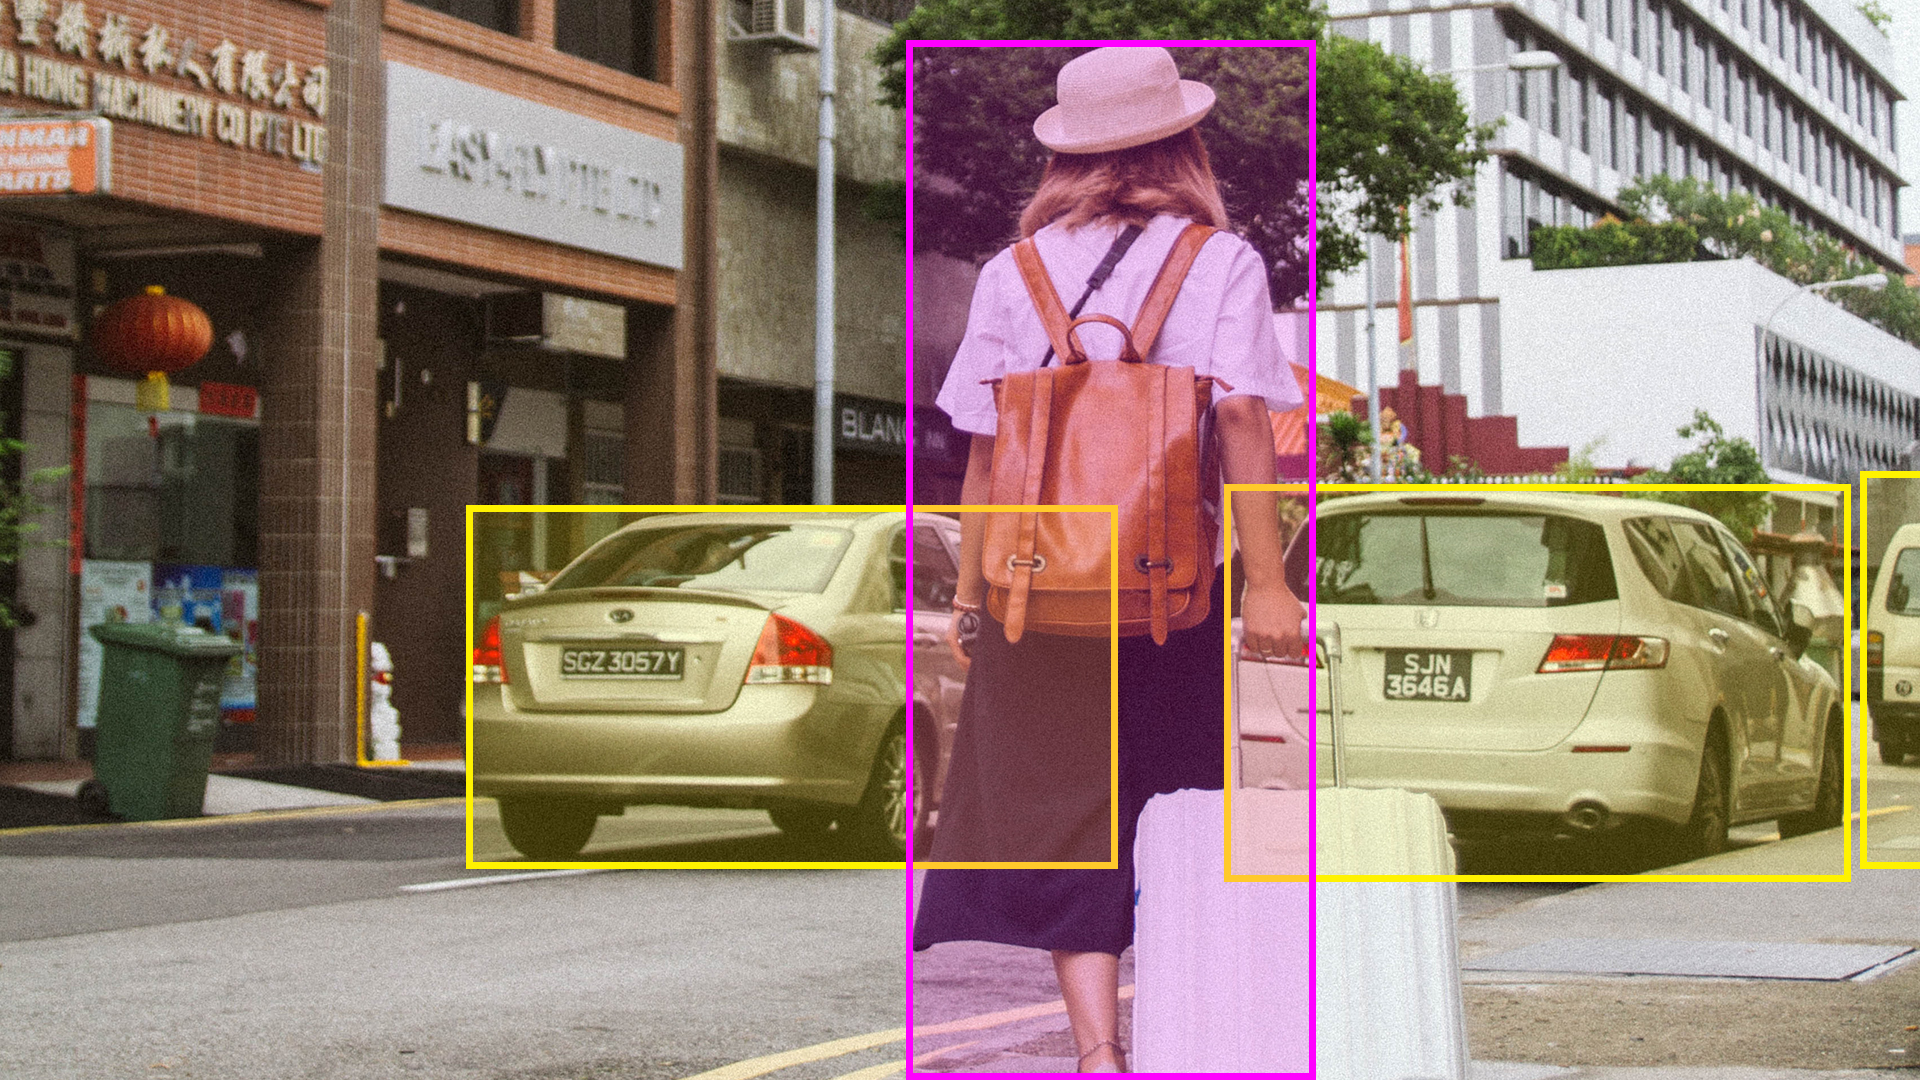 Object Recognition Image Annotation